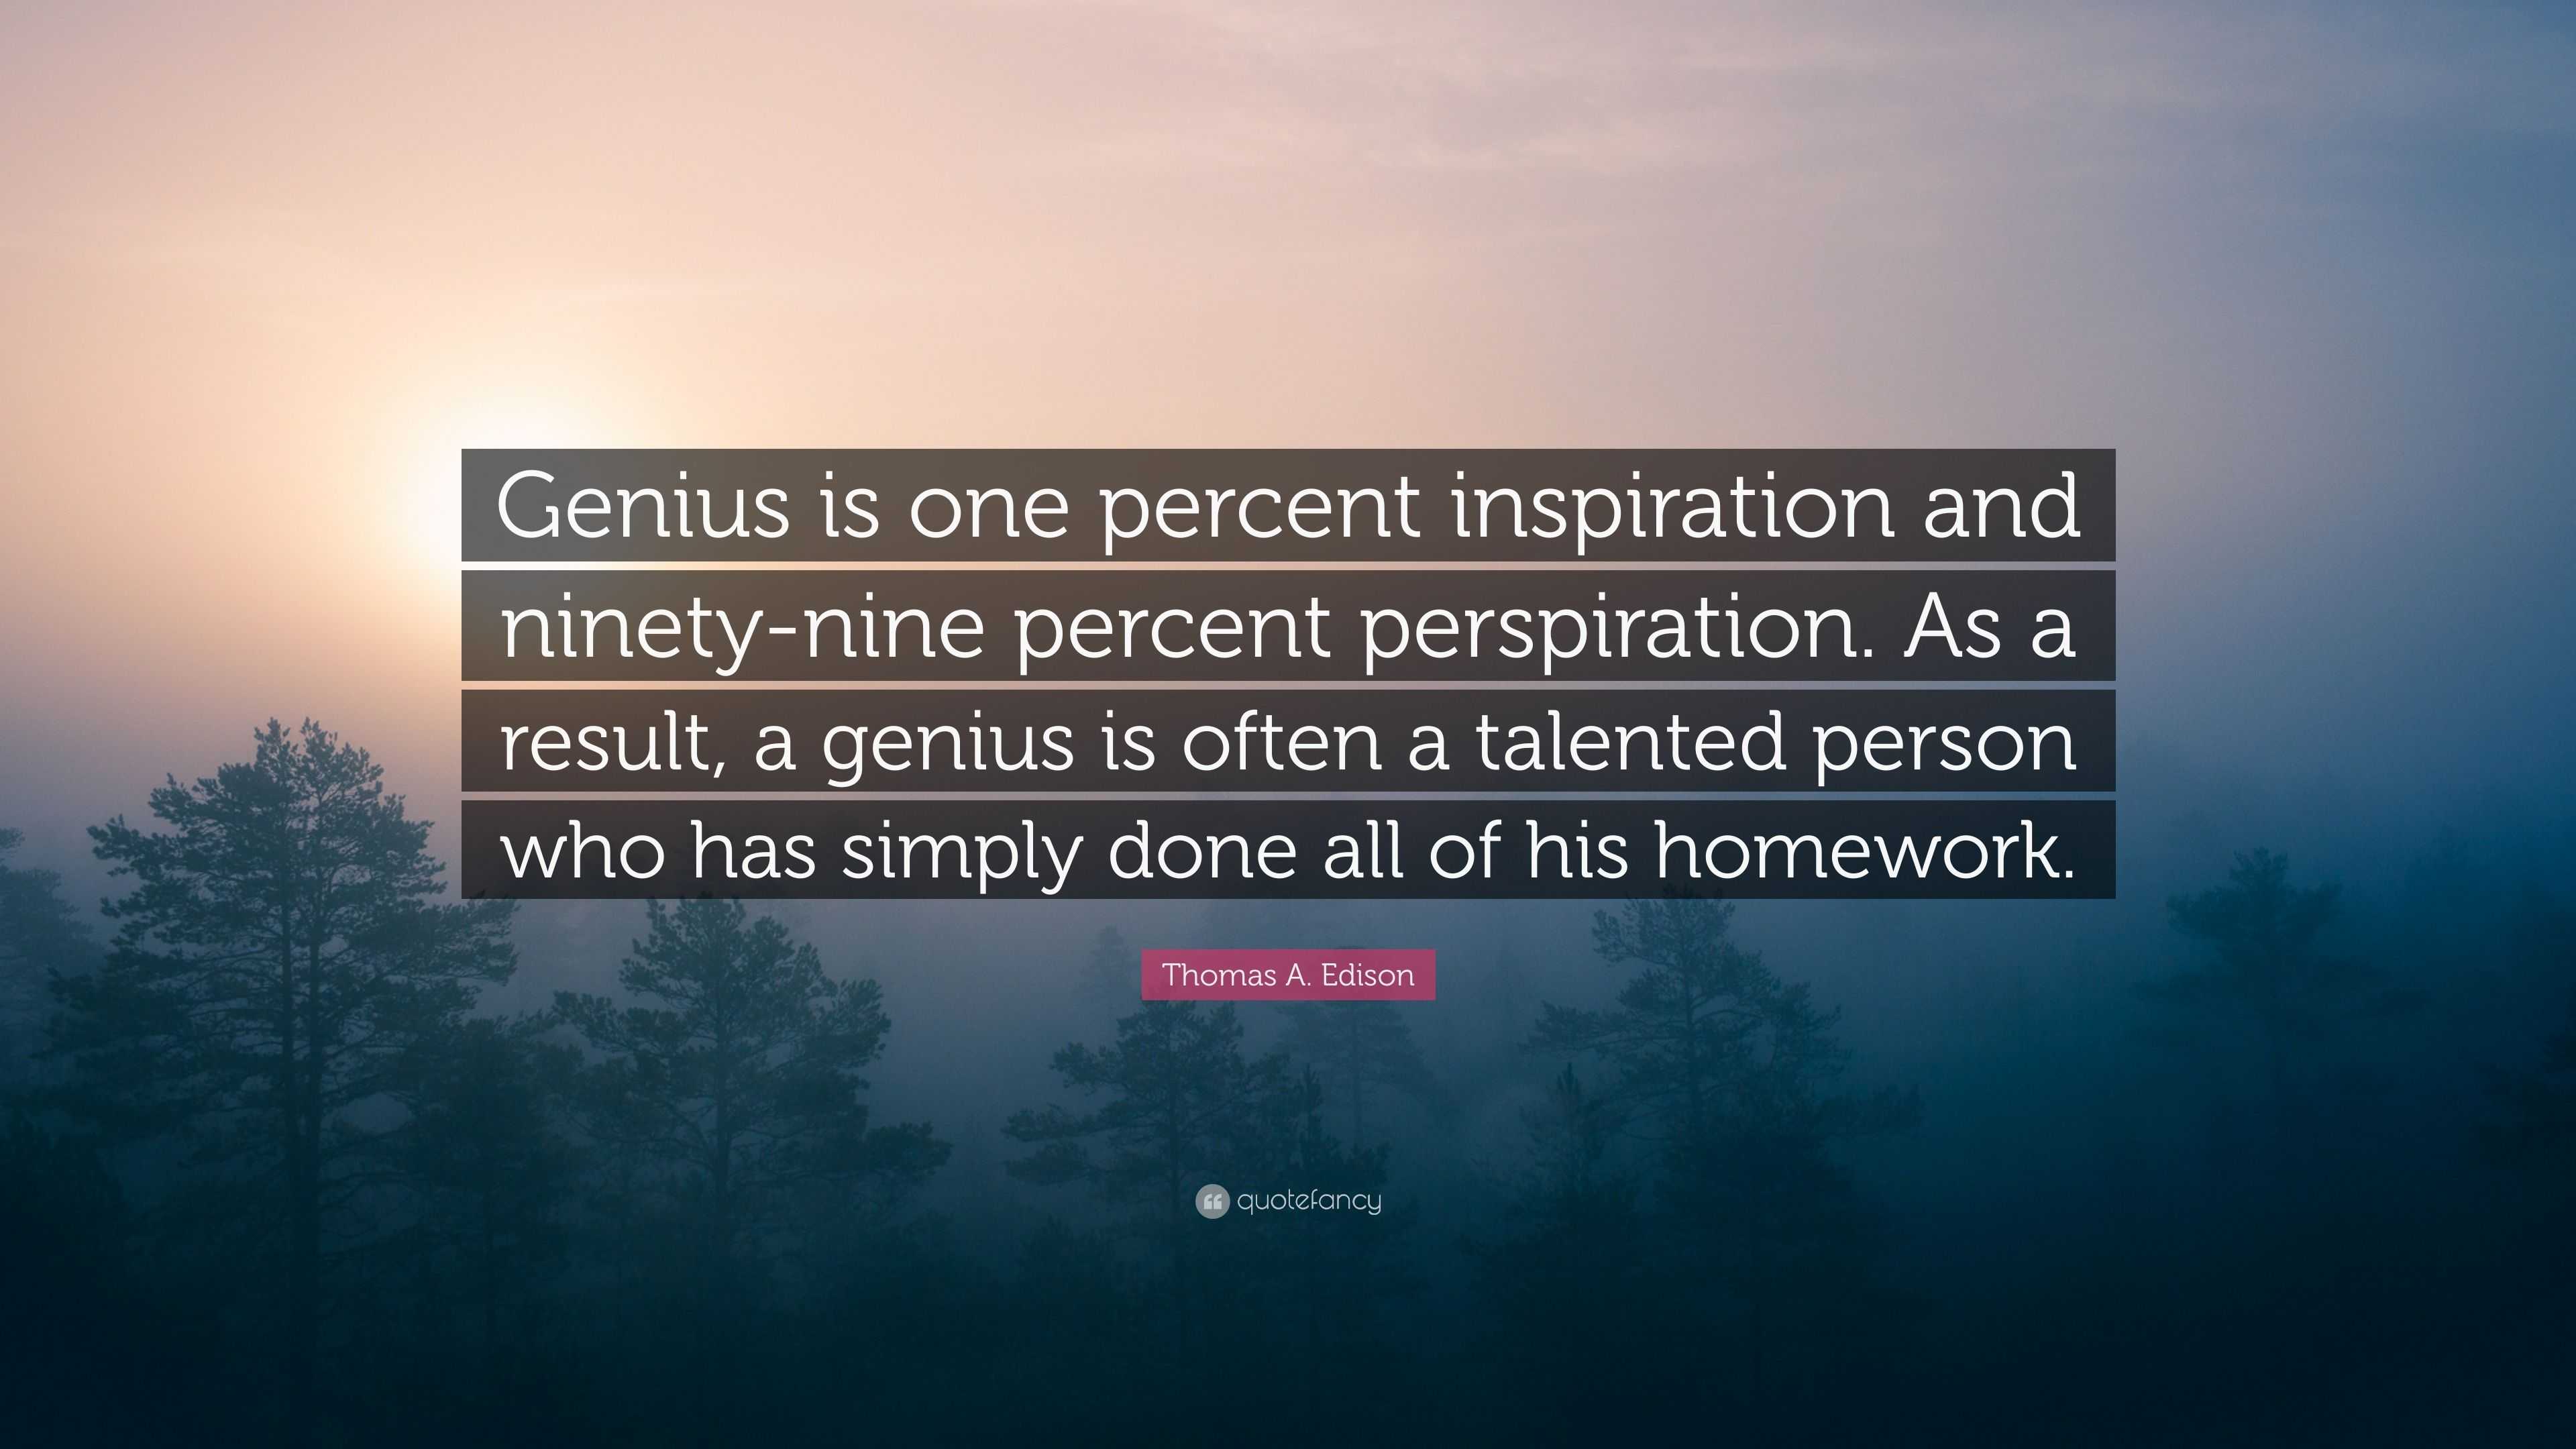 Thomas A. Edison Quote: “Genius is one percent inspiration and ninety